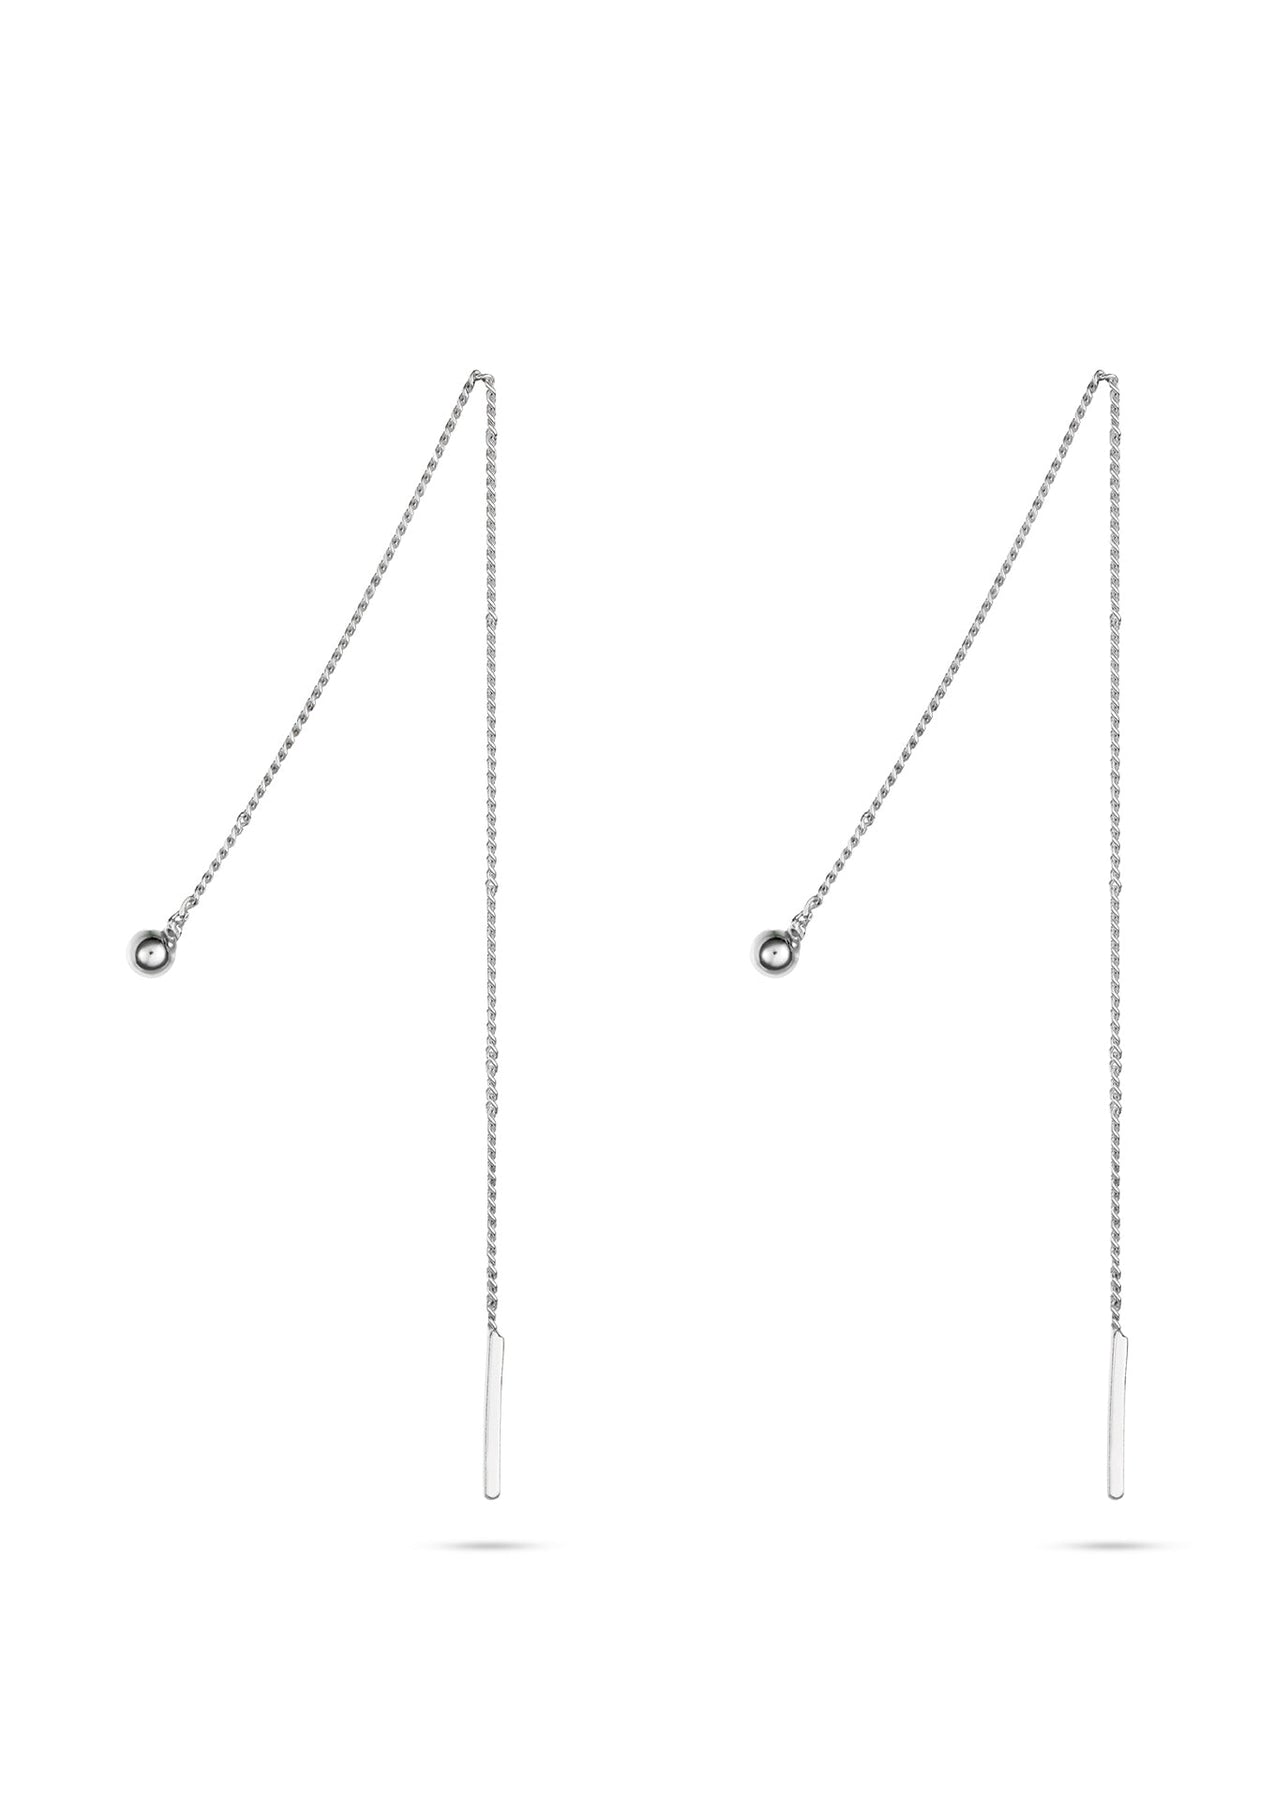 Silver threader chain earrings featuring a delicate chain design for a classy, minimalist look. Hand-made in Lithuania with sterling silver, measuring ~11 cm long x 3 mm bubble.